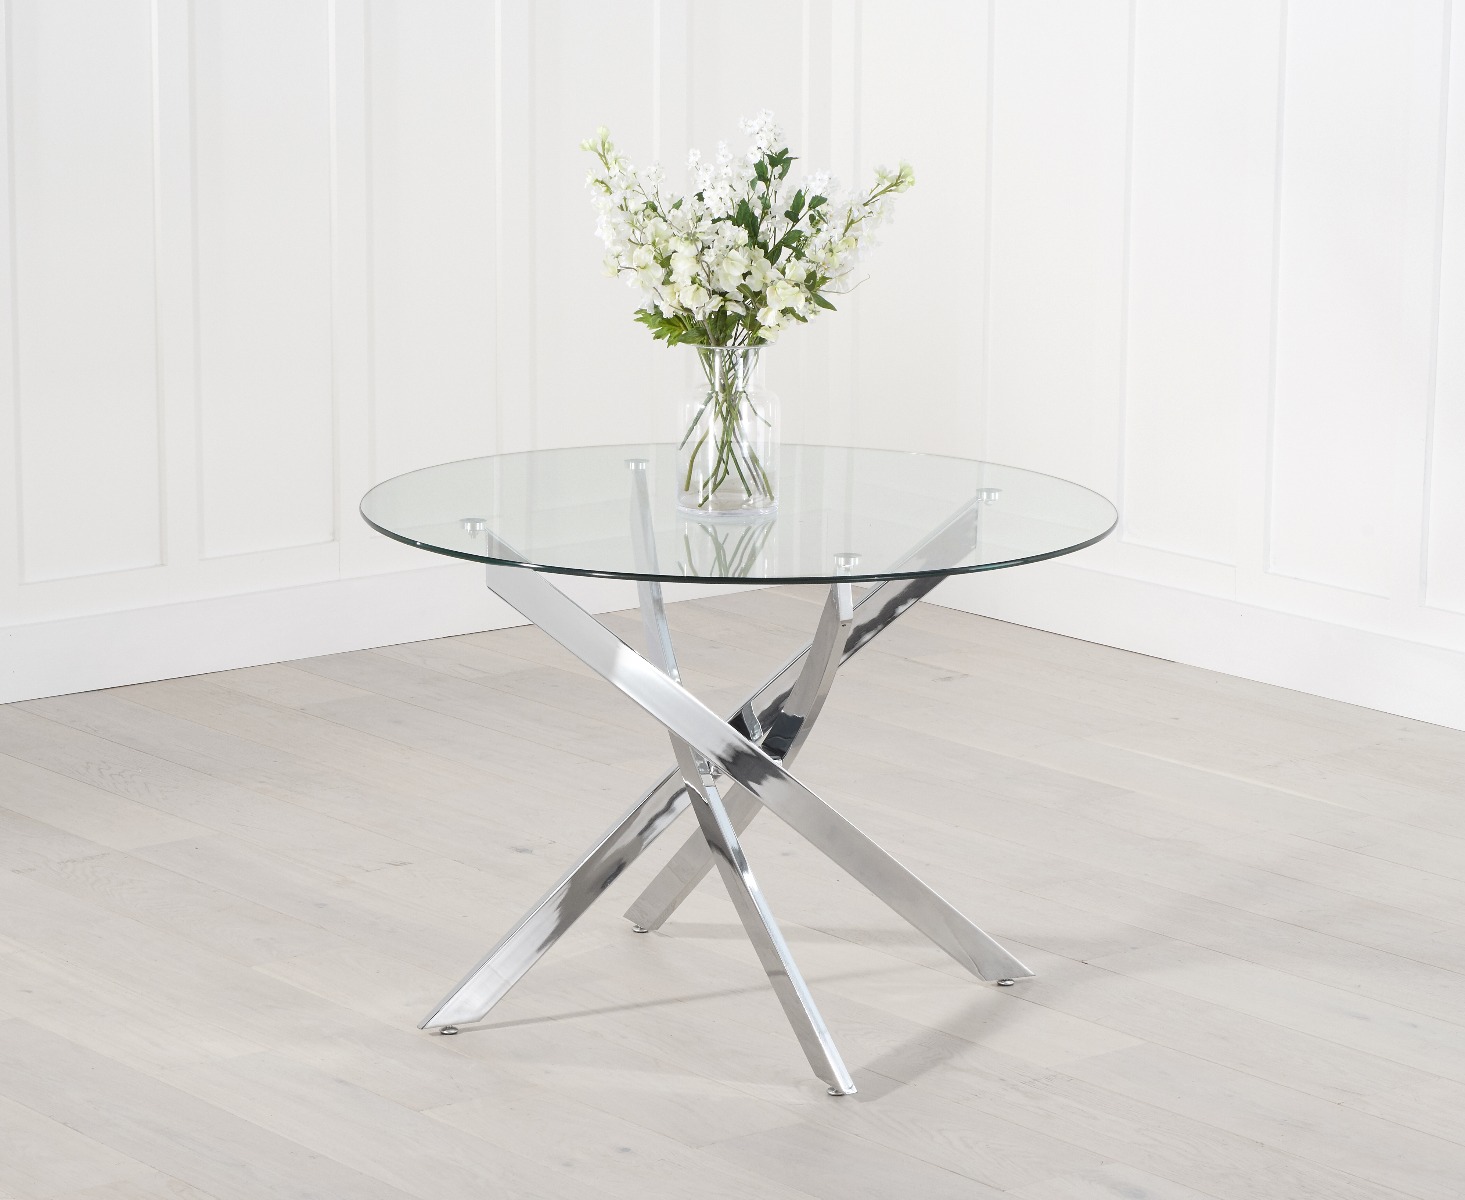 Photo 5 of Denver 120cm glass dining table with 6 white vigo chairs